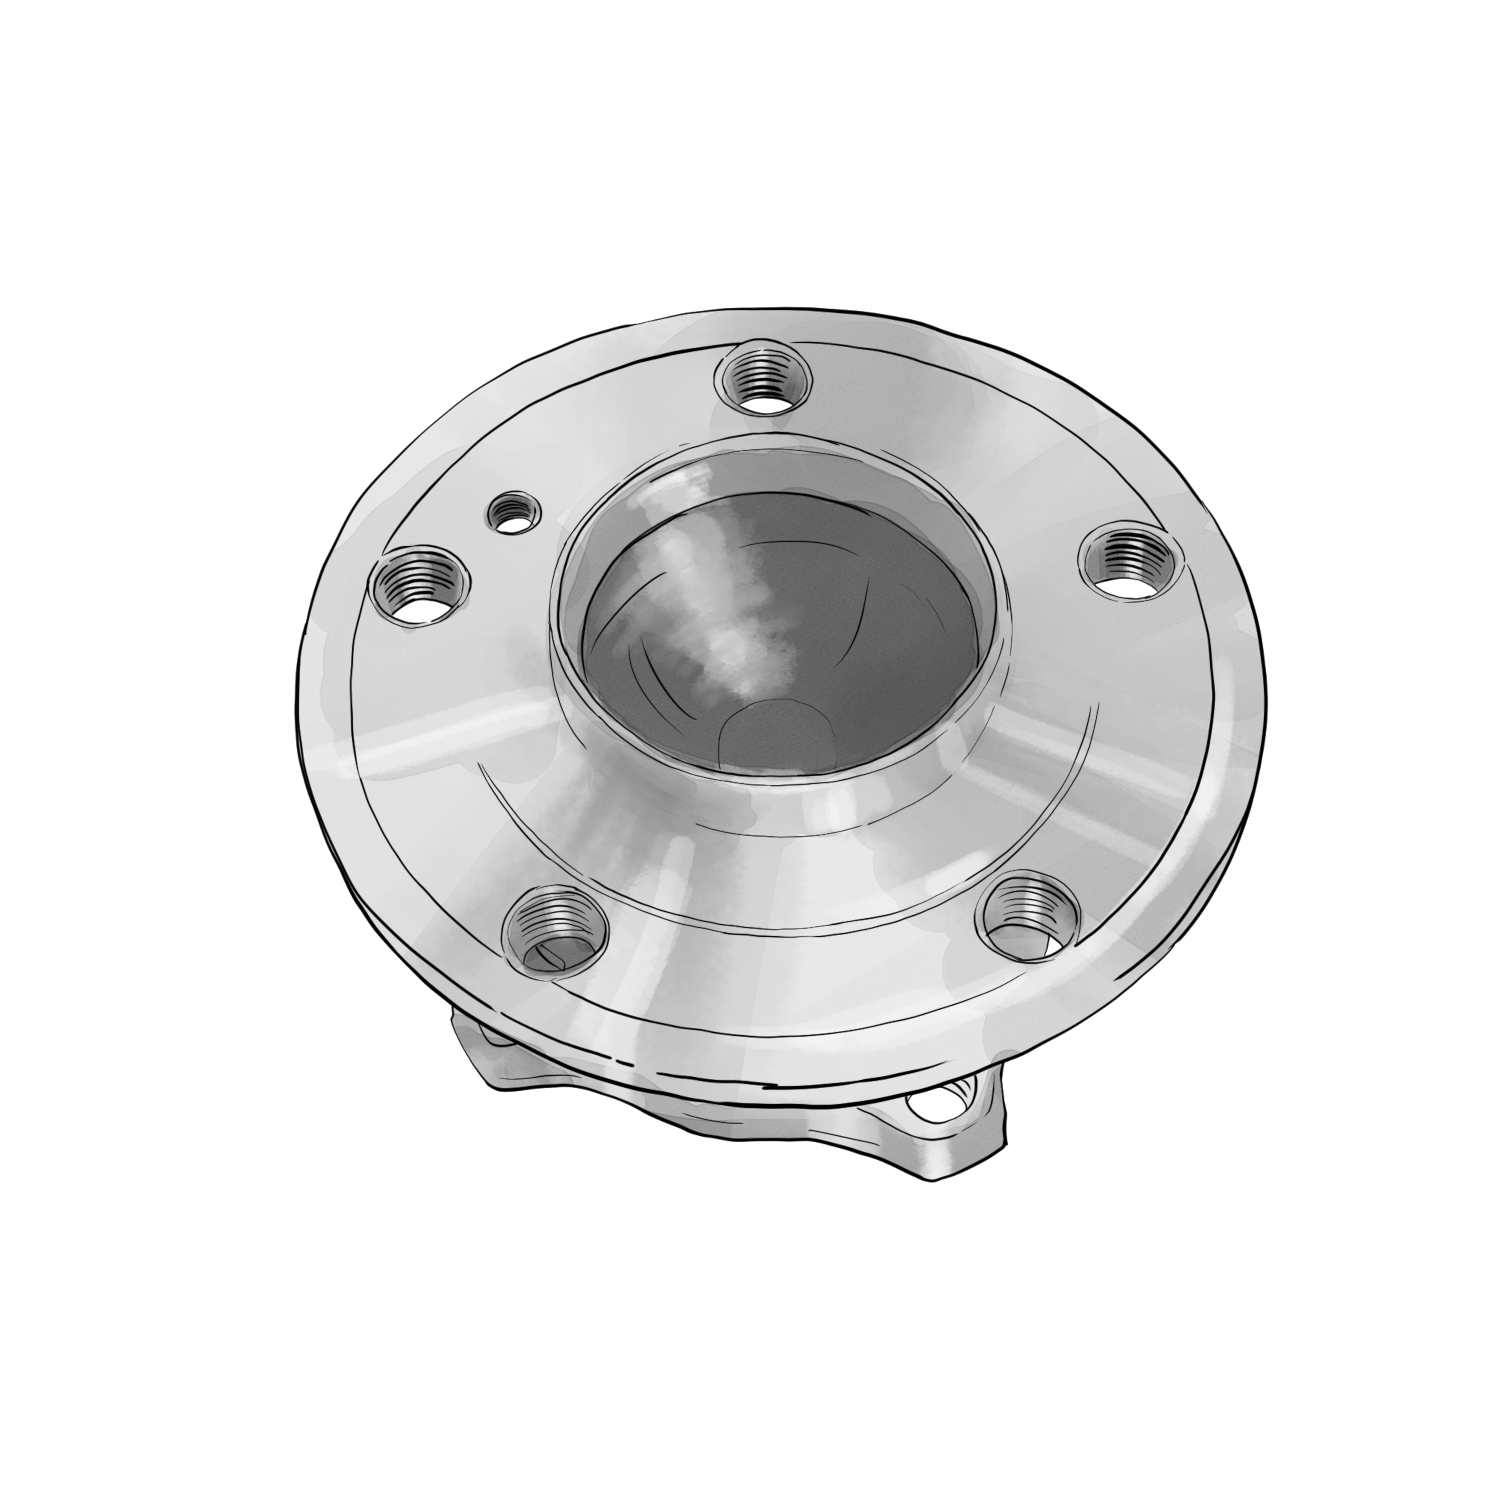  Product image 1 of the product “Rear wheel bearing ”